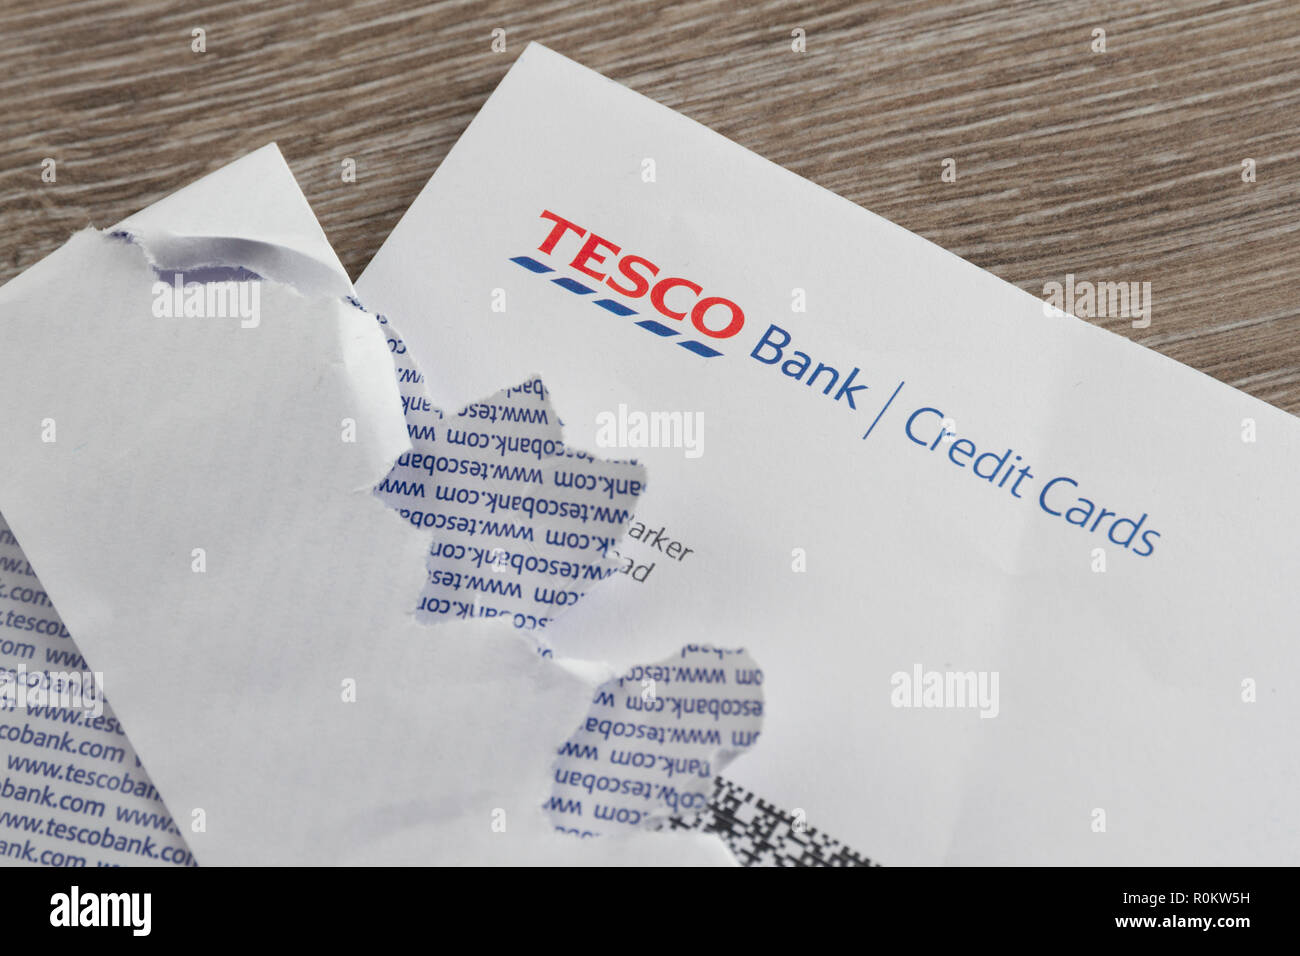 Tesco Bank Credit Card statement on table with ripped open envelope. Stock Photo